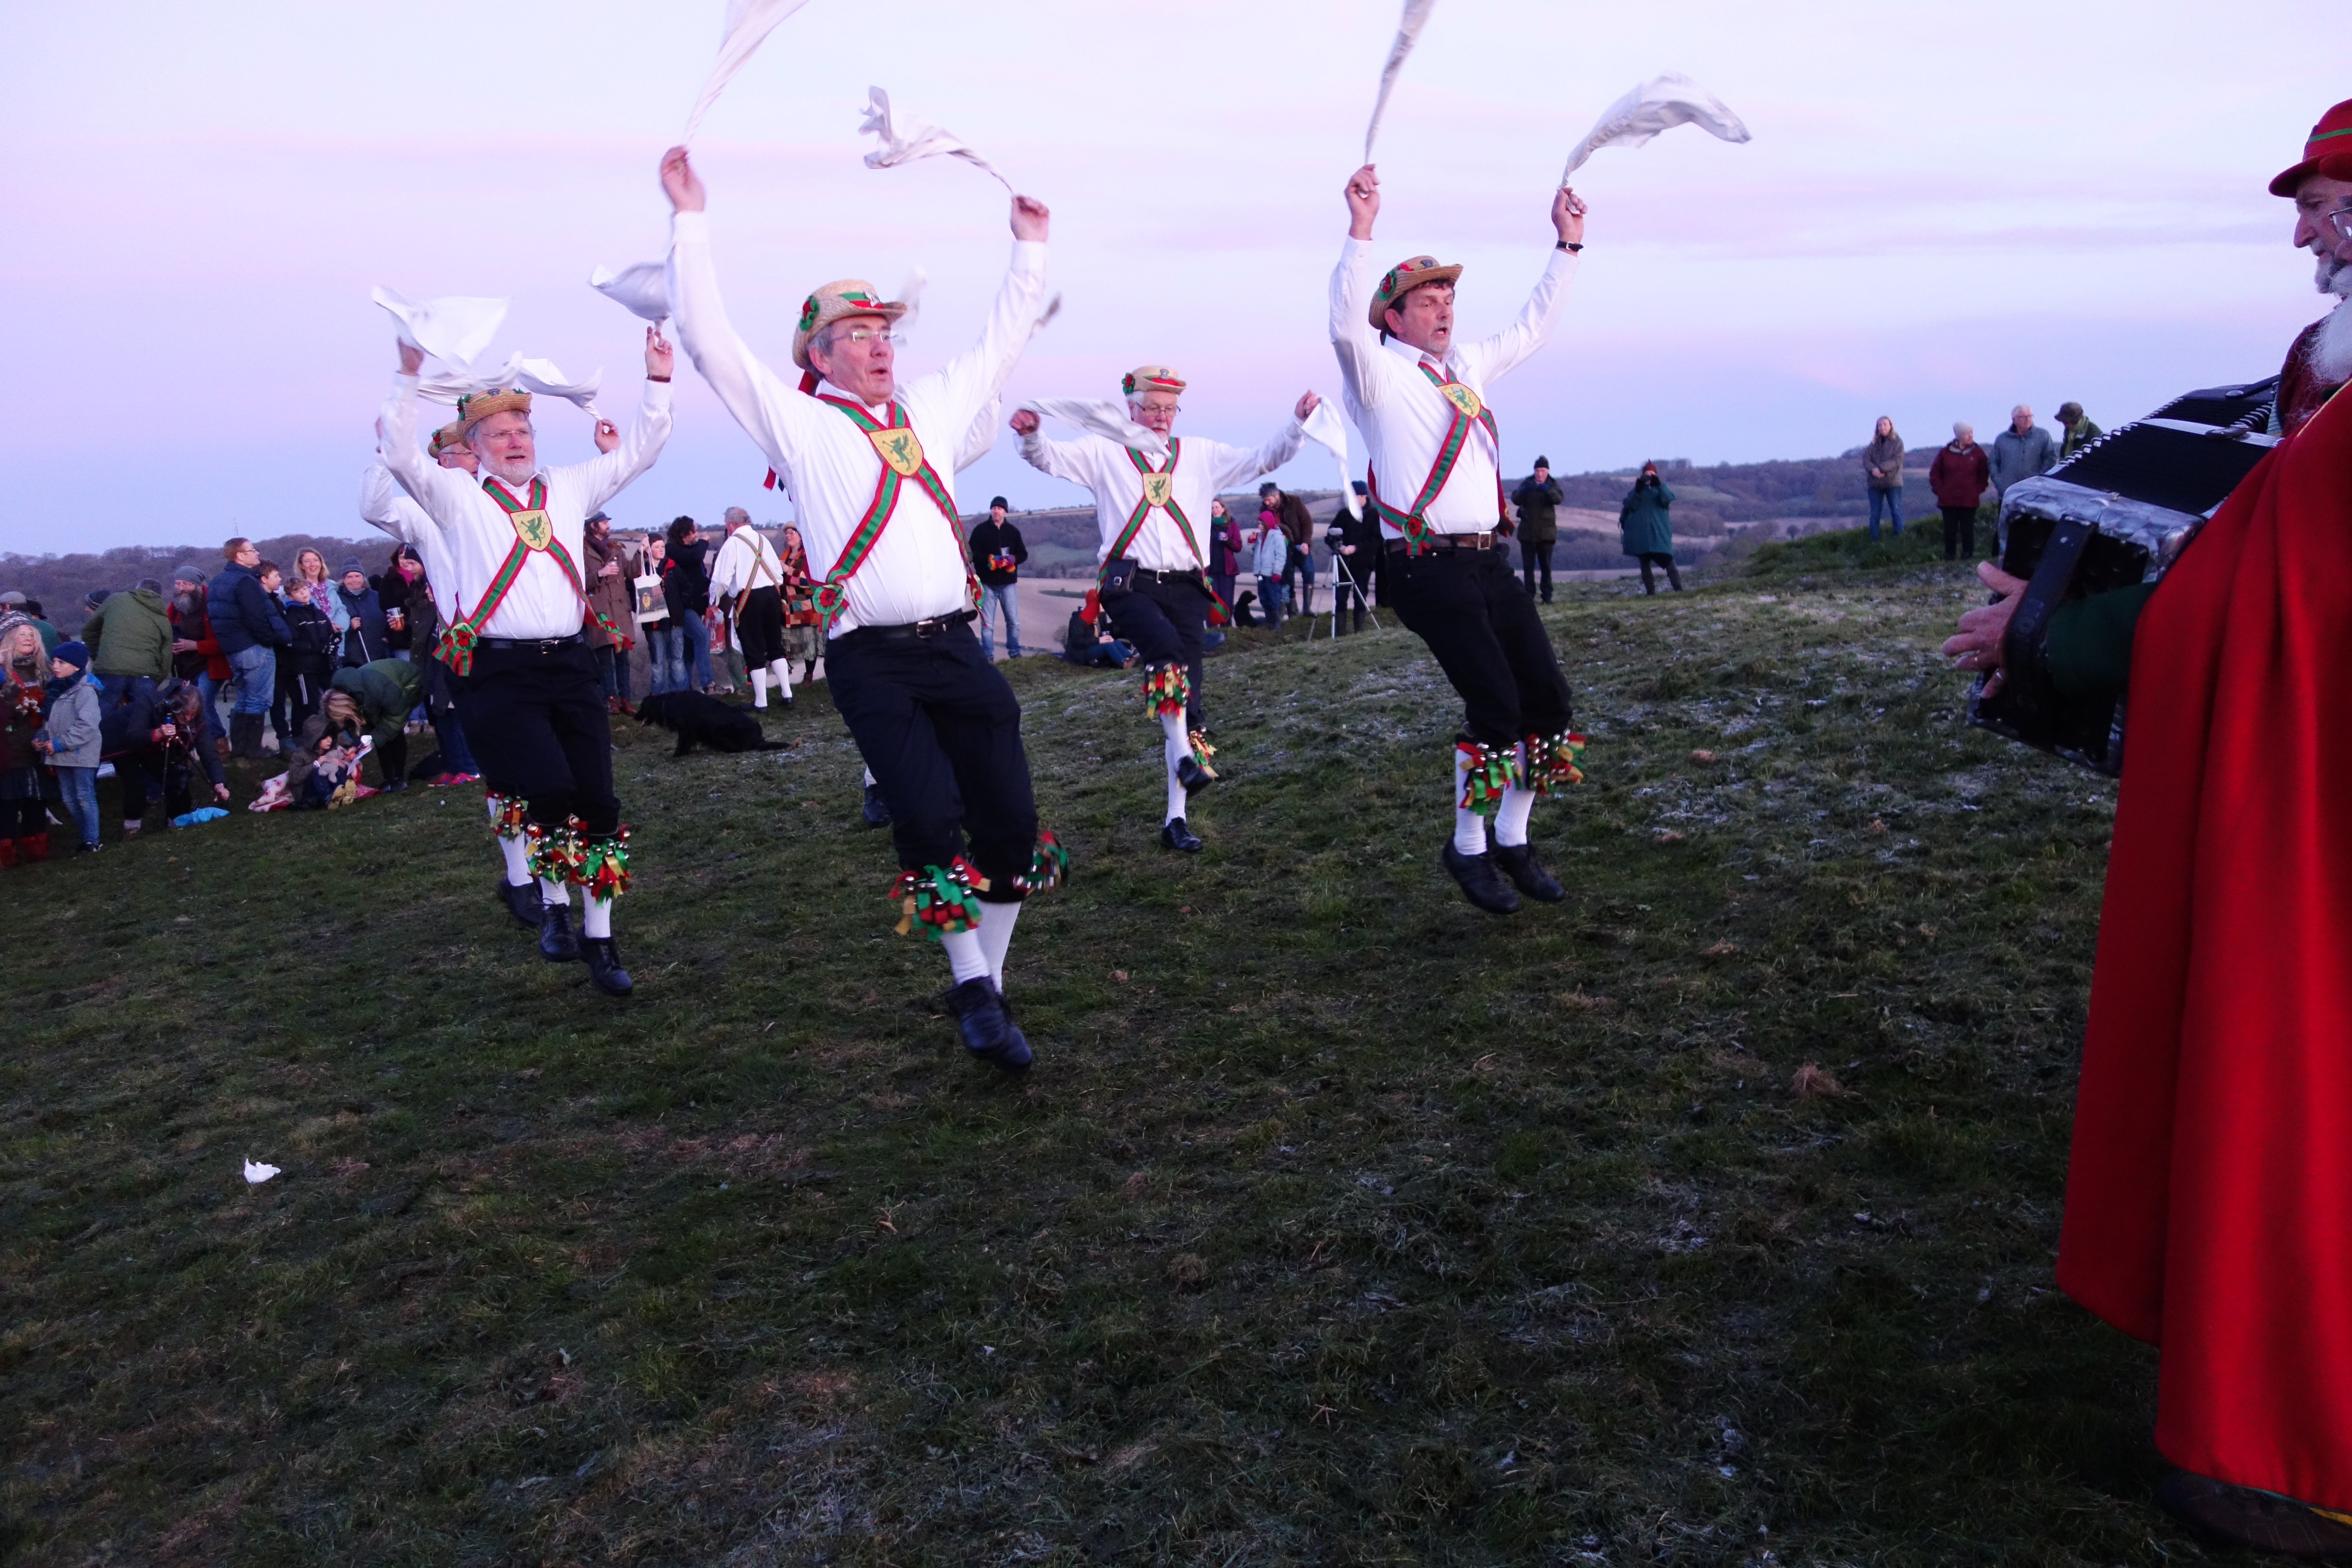 Wessex Morris Men dancing on the Trendle, above the Giant's head, May morning sunrise 2016.